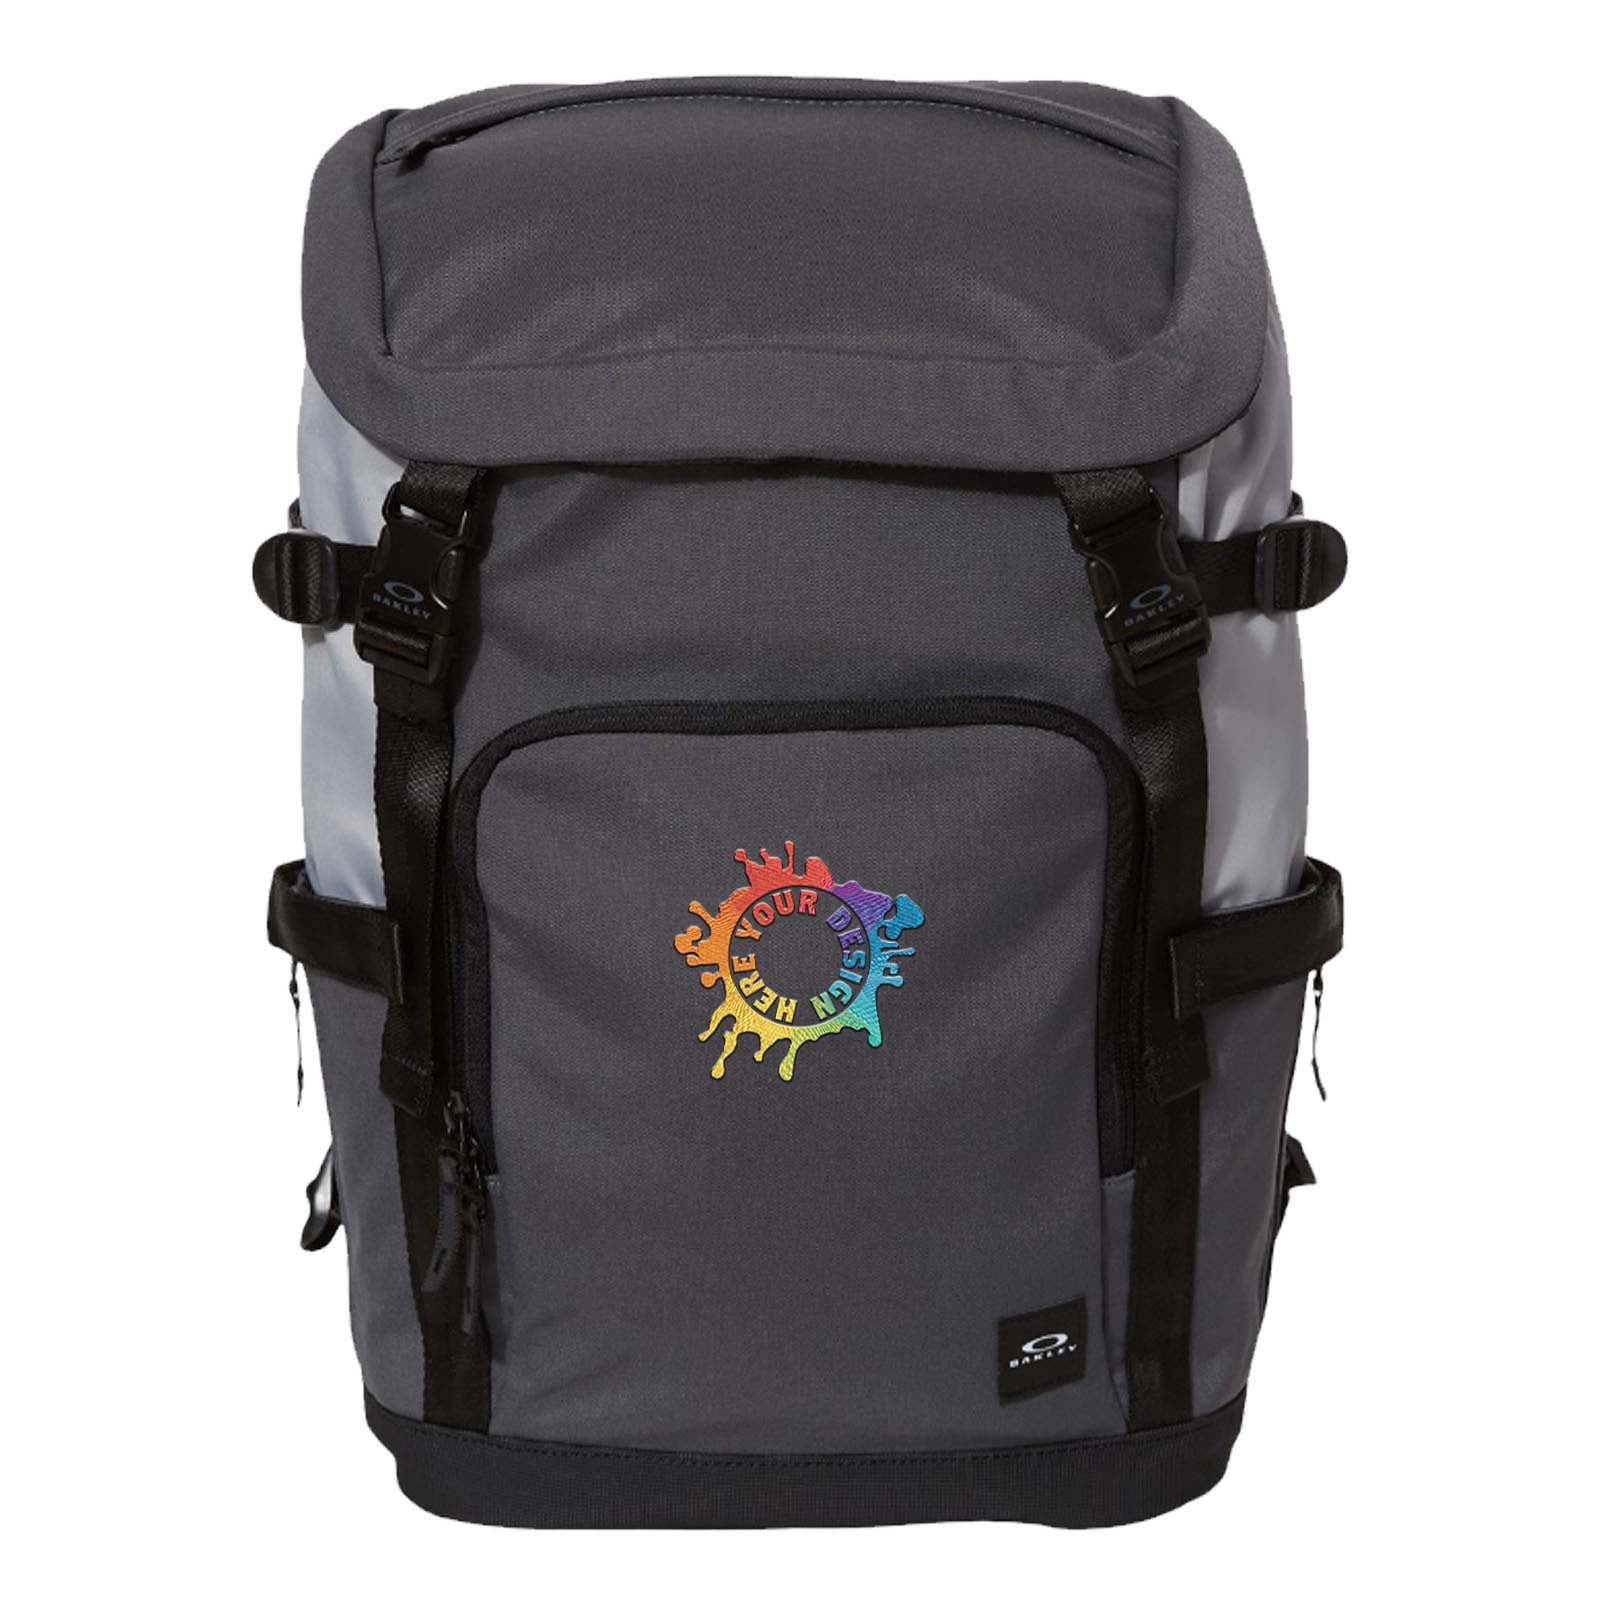 Oakley 22L Organizing Backpack Embroidery - Mato & Hash